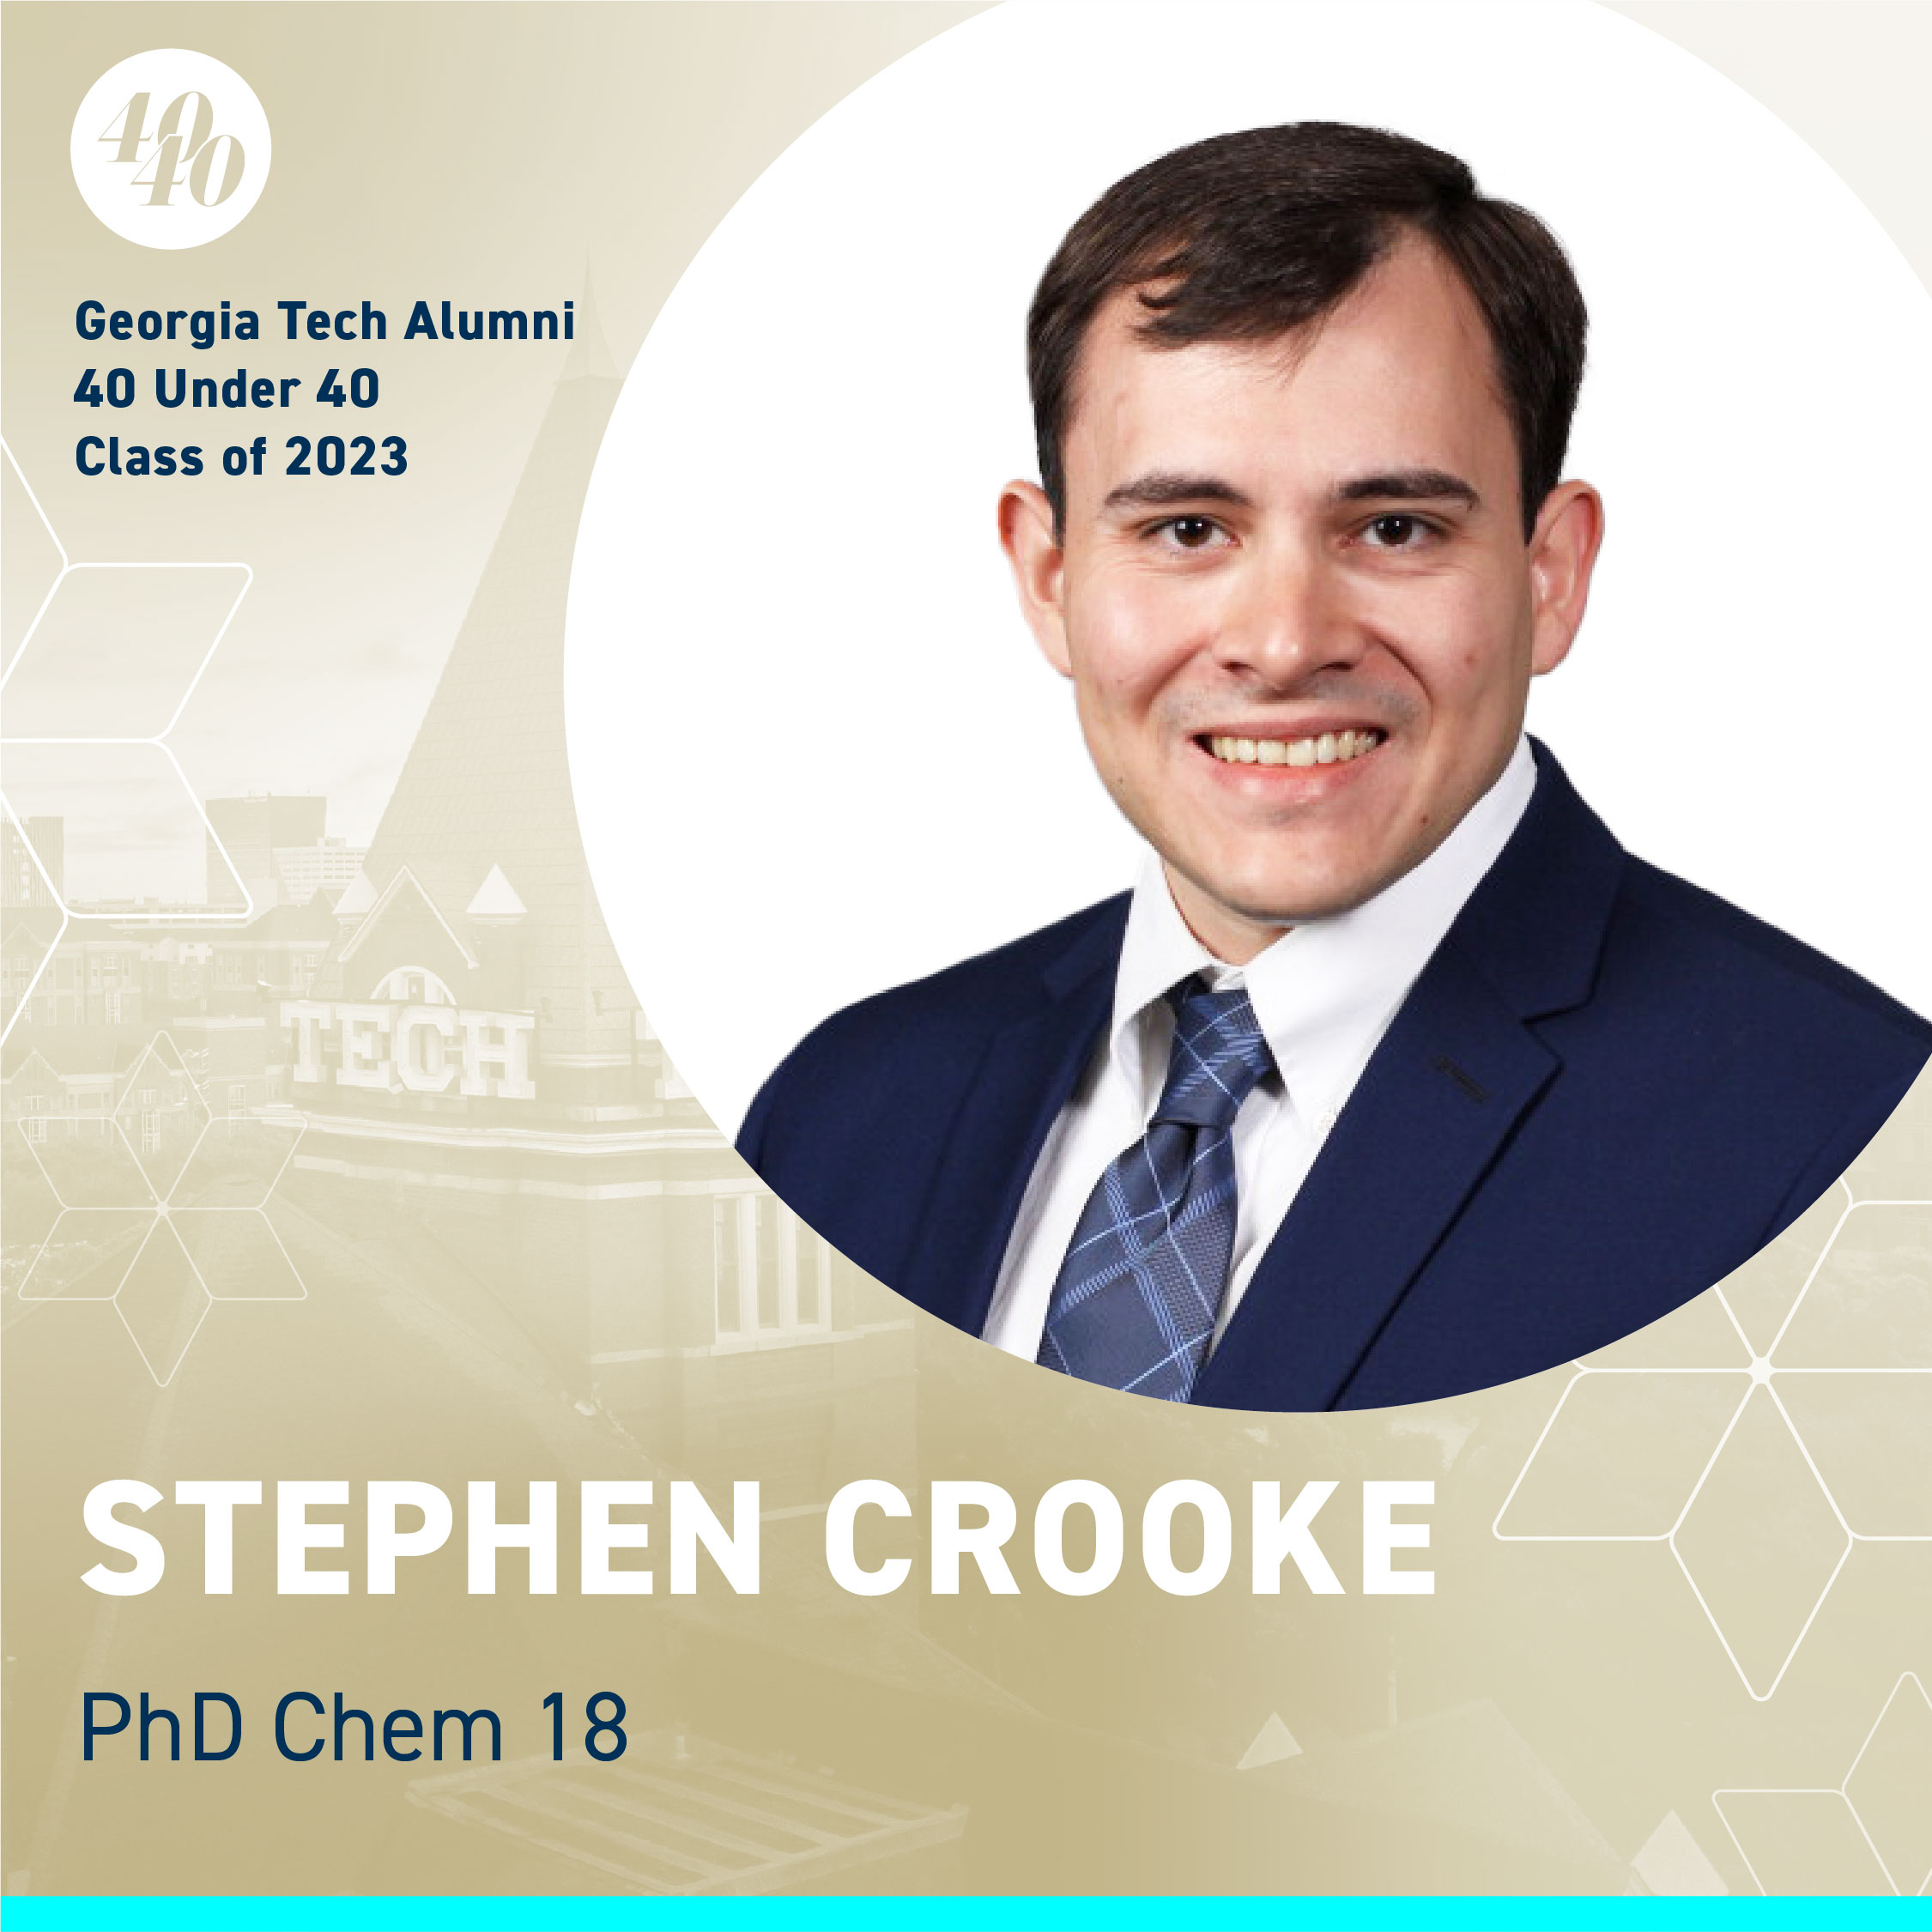 Stephen Crooke, Ph.D. Chem ‘18 (Lead Microbiologist, Vaccine Immunology at the Centers for Disease Control and Prevention)